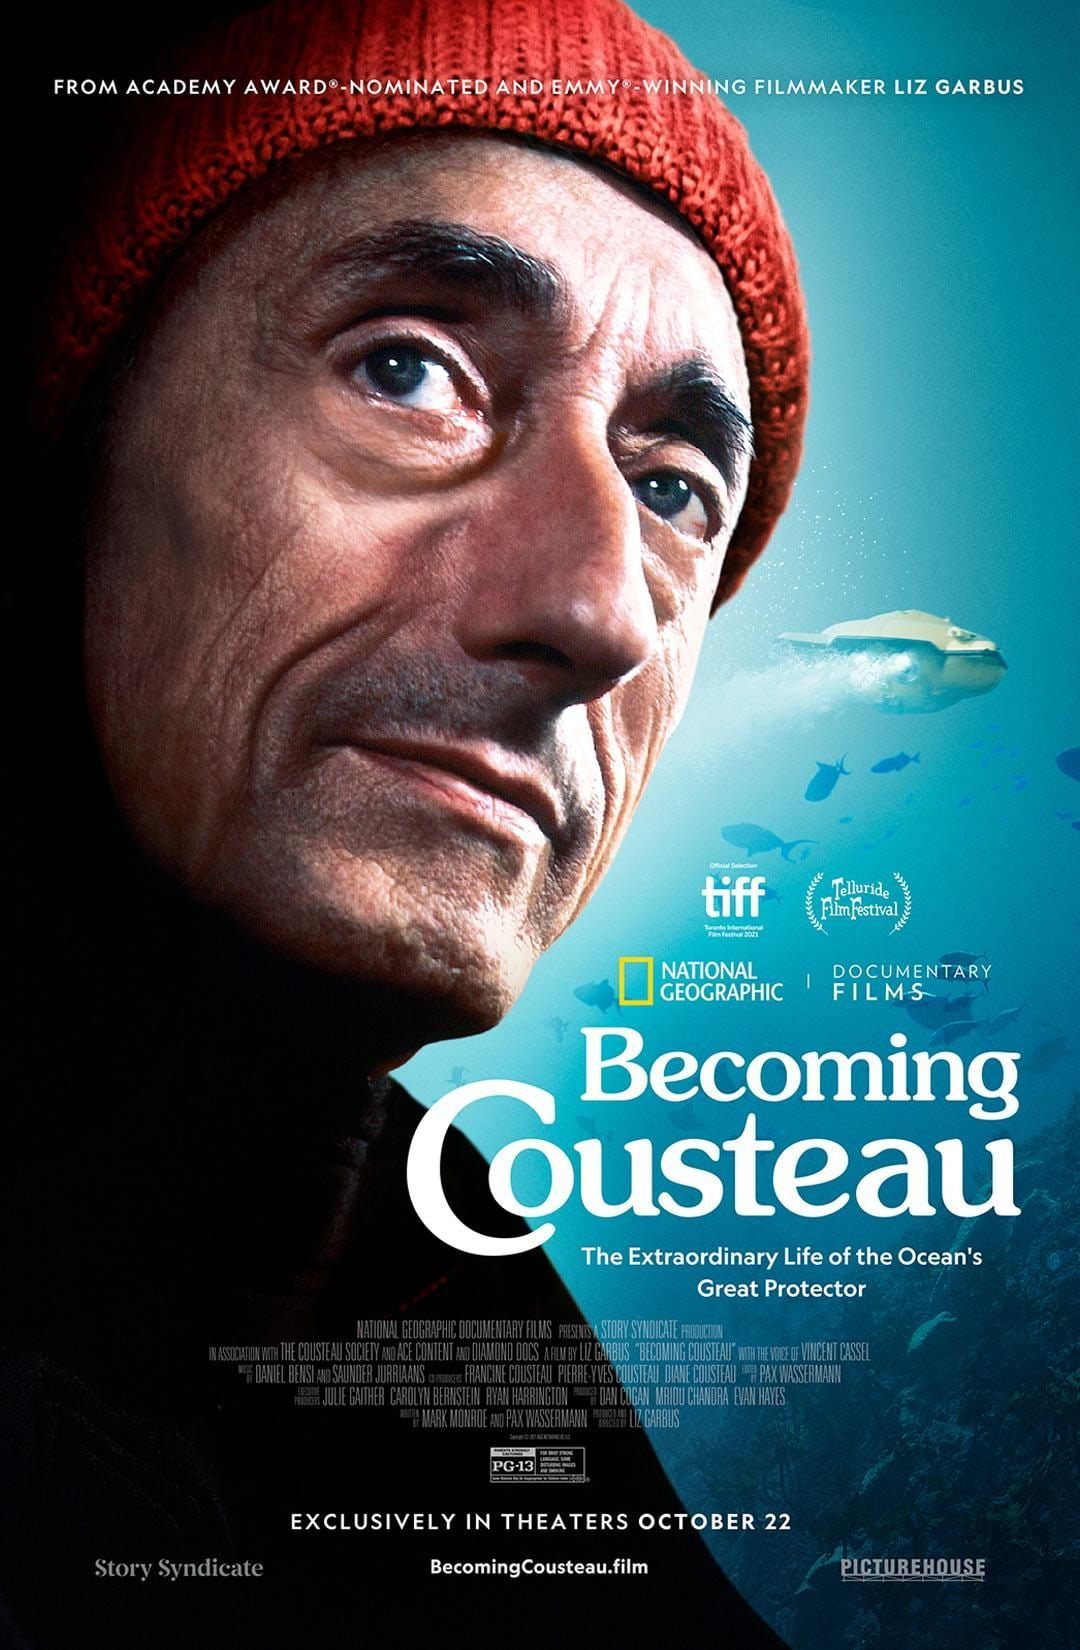 [UPDATED] The Cousteau Society and National Geographic documentary film